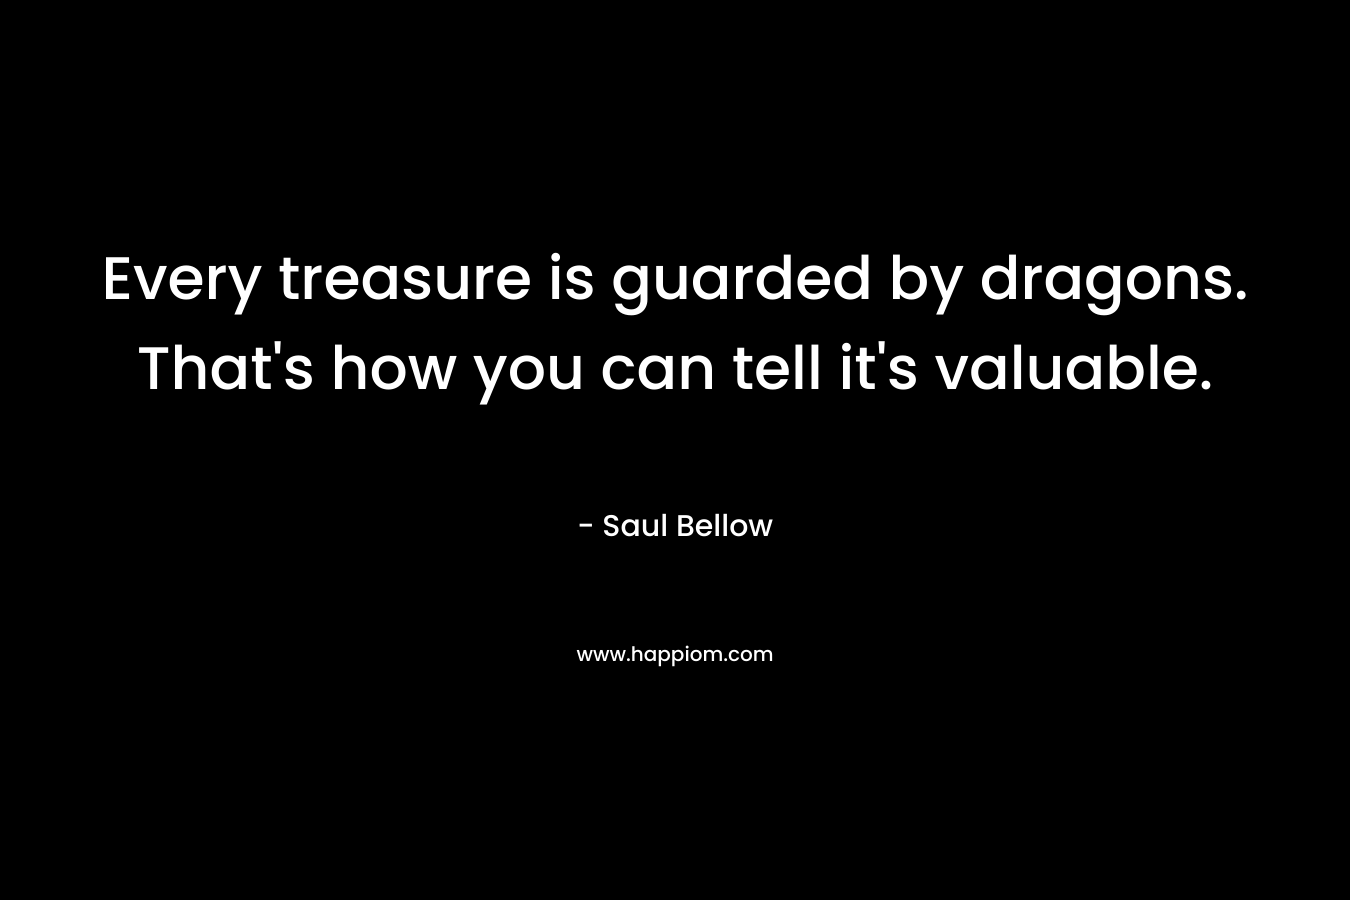 Every treasure is guarded by dragons. That’s how you can tell it’s valuable. – Saul Bellow